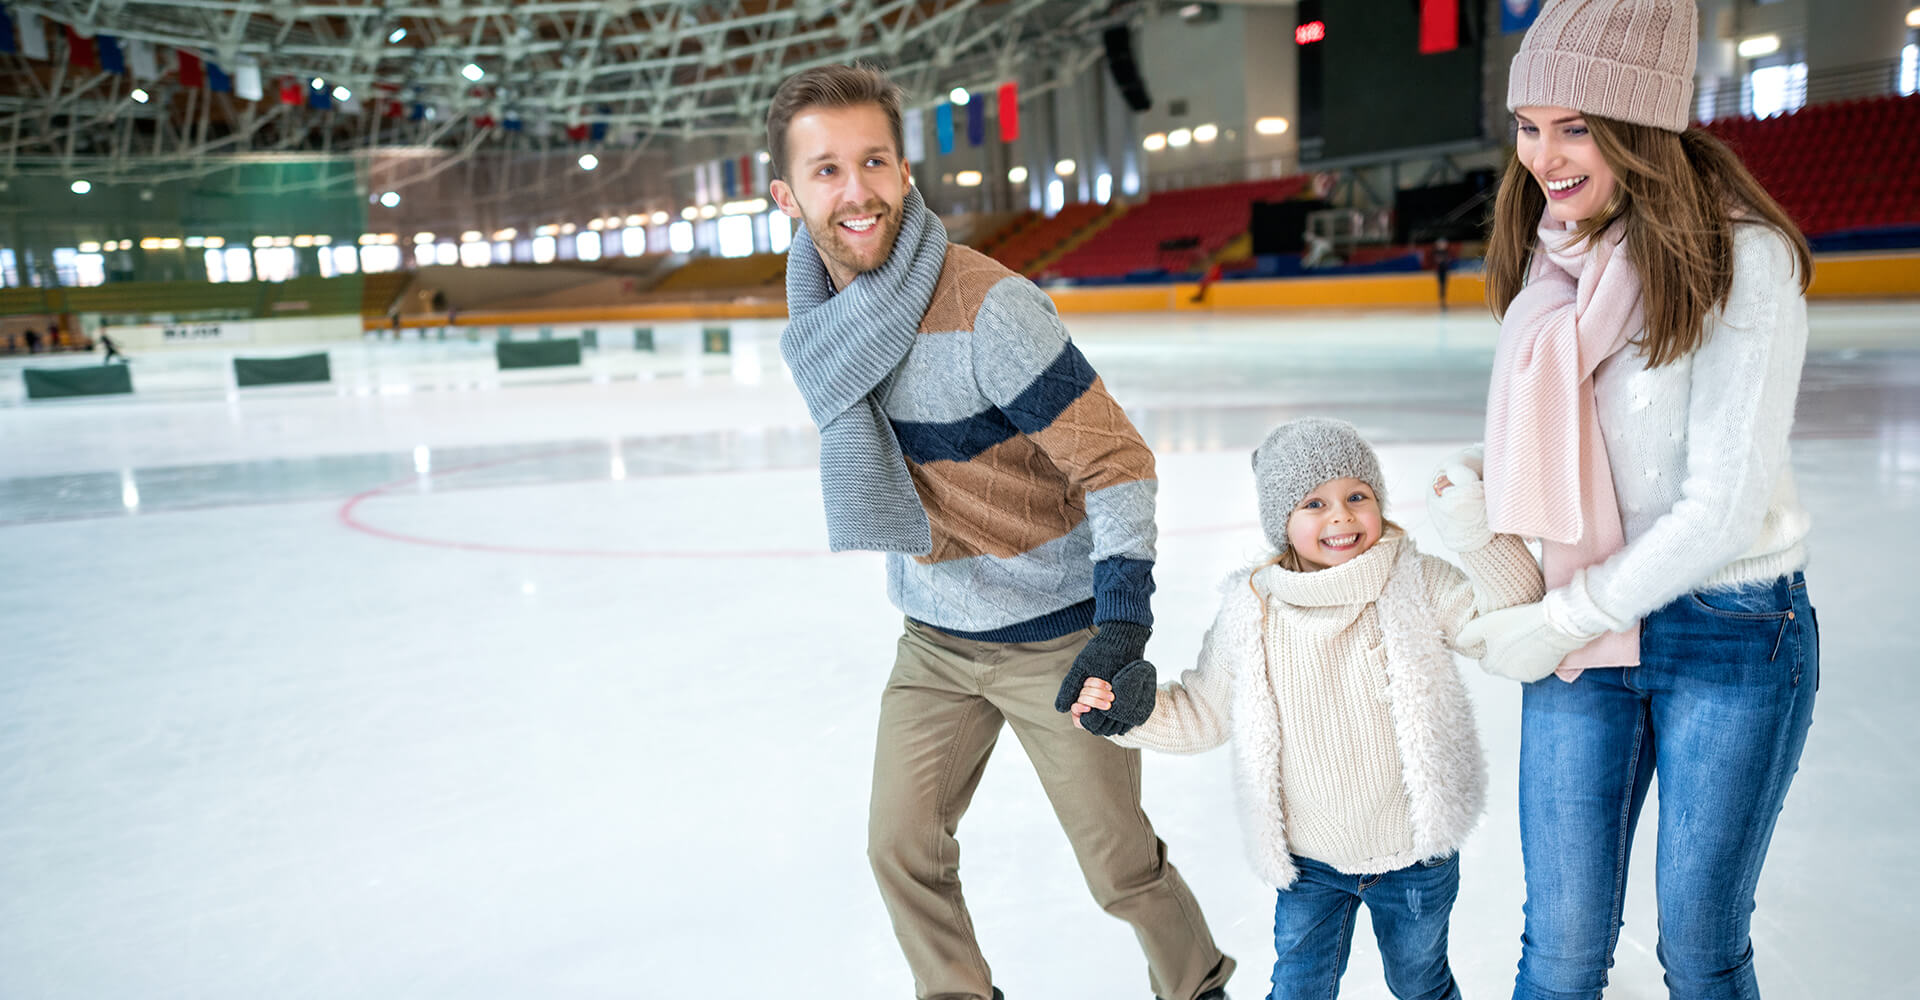 A Baby skating with her mom & dad